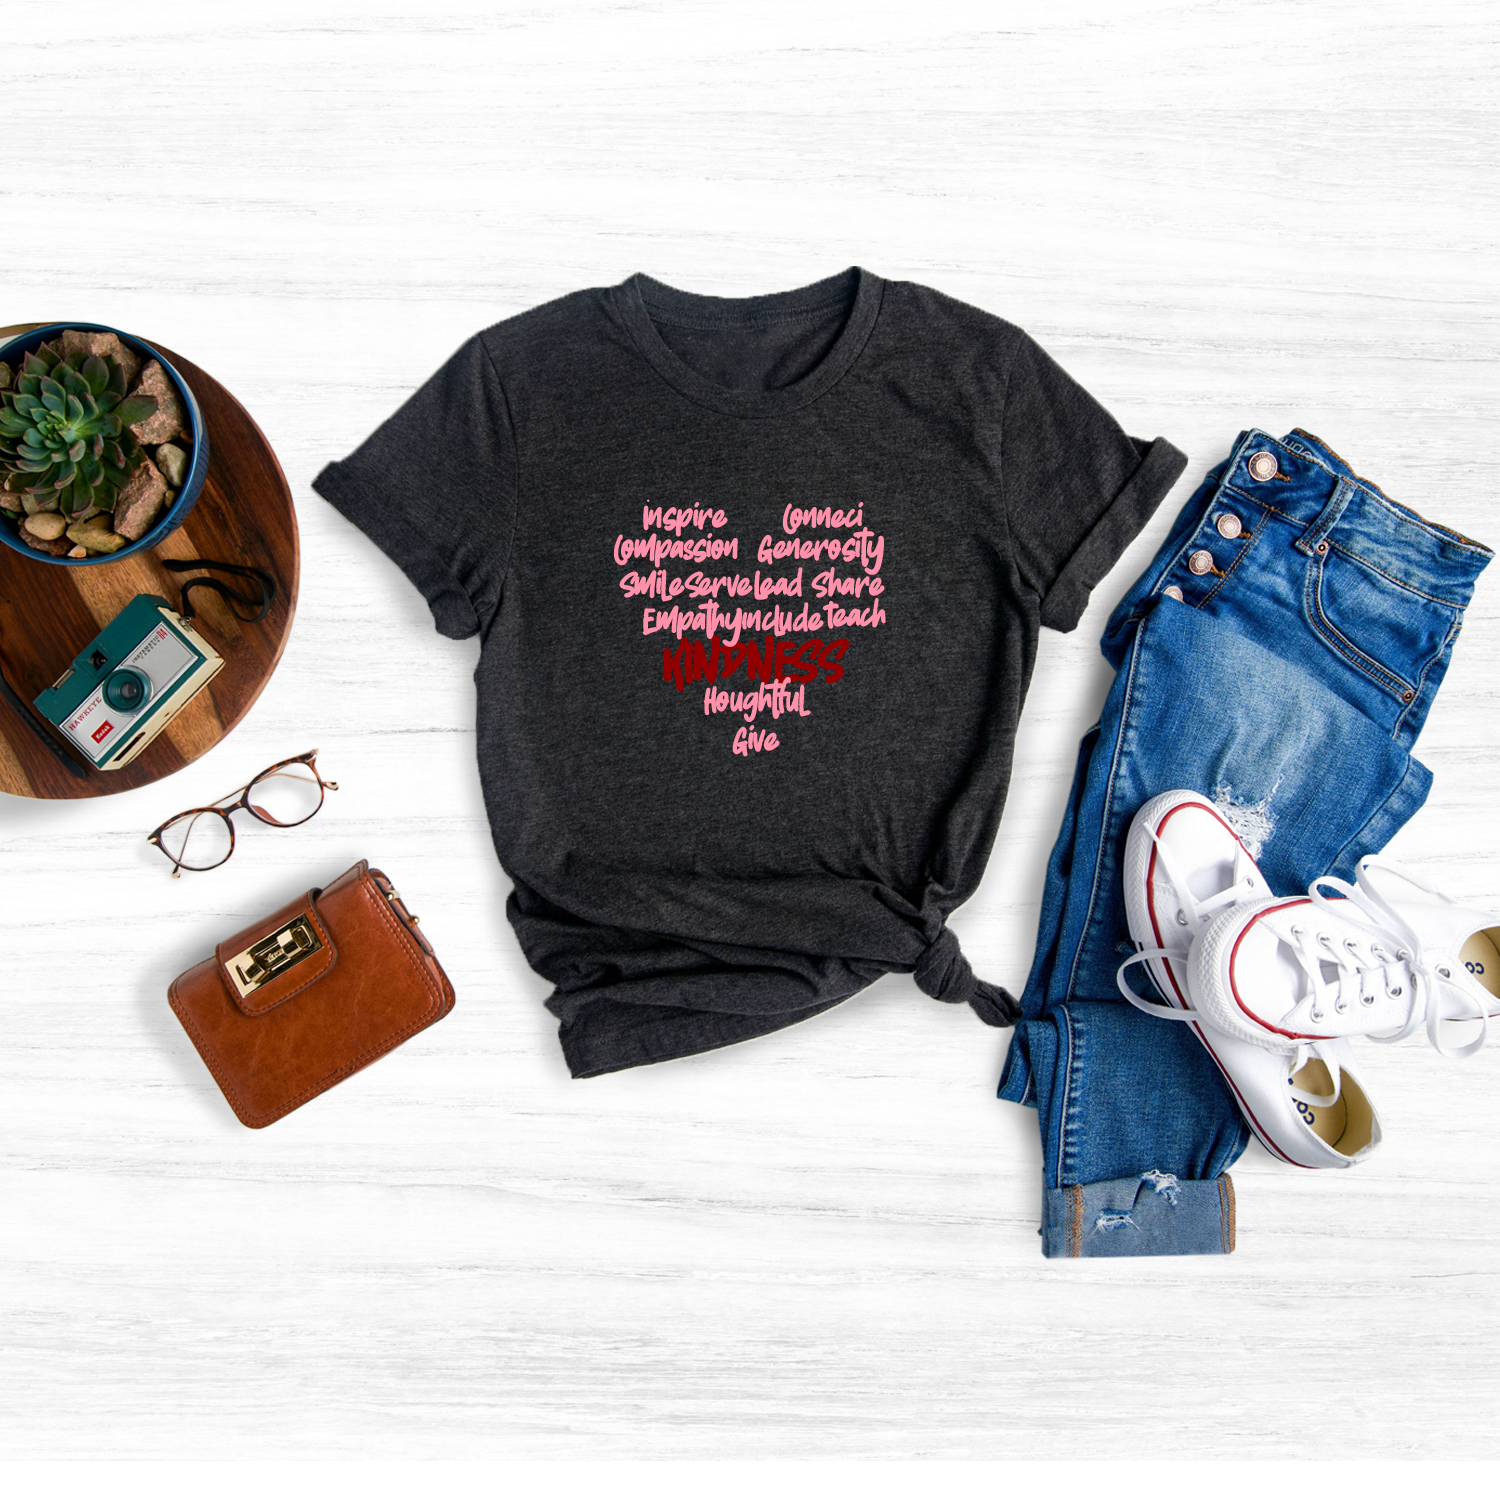 Spread kindness and compassion with this adorable heart-shaped "Be Kind" graphic tee.